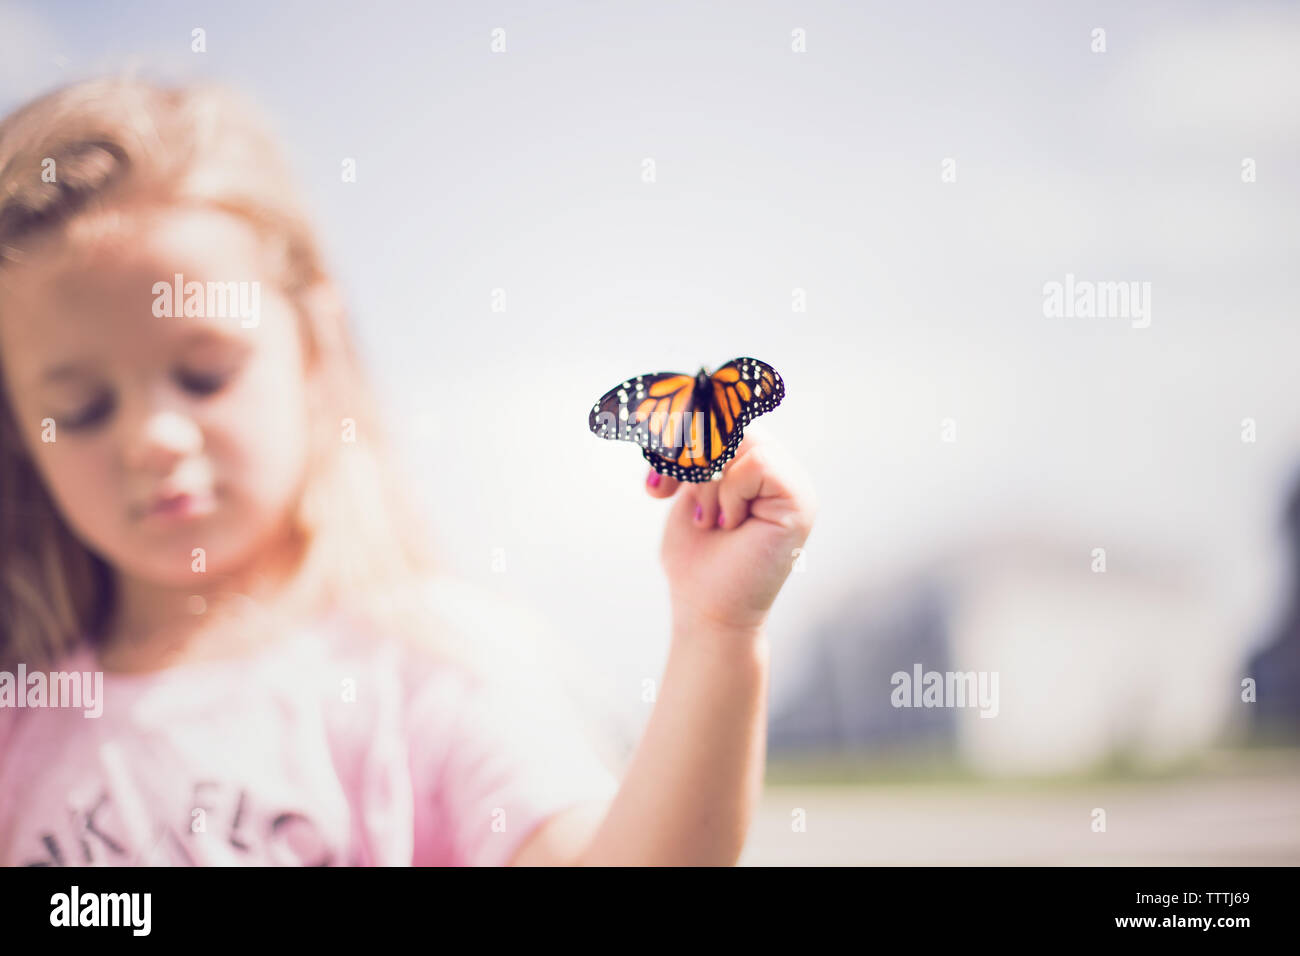 Butterfly taking flight from young conservationist. Stock Photo